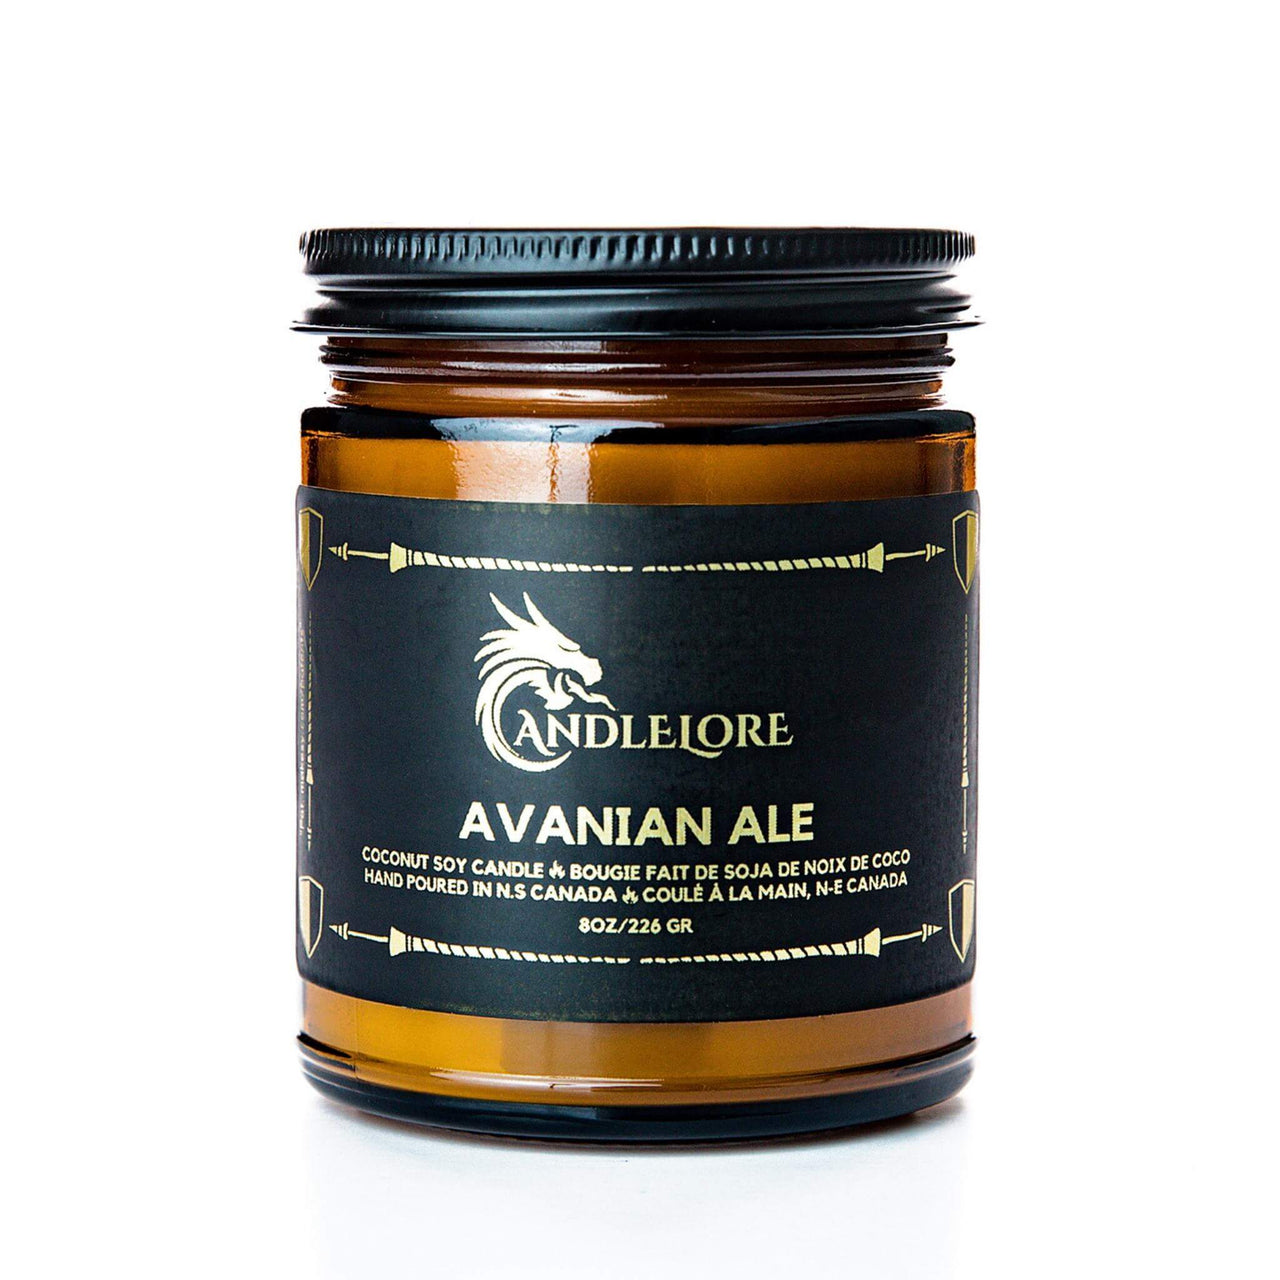 Medium Avanian Ale scented candle on a white background